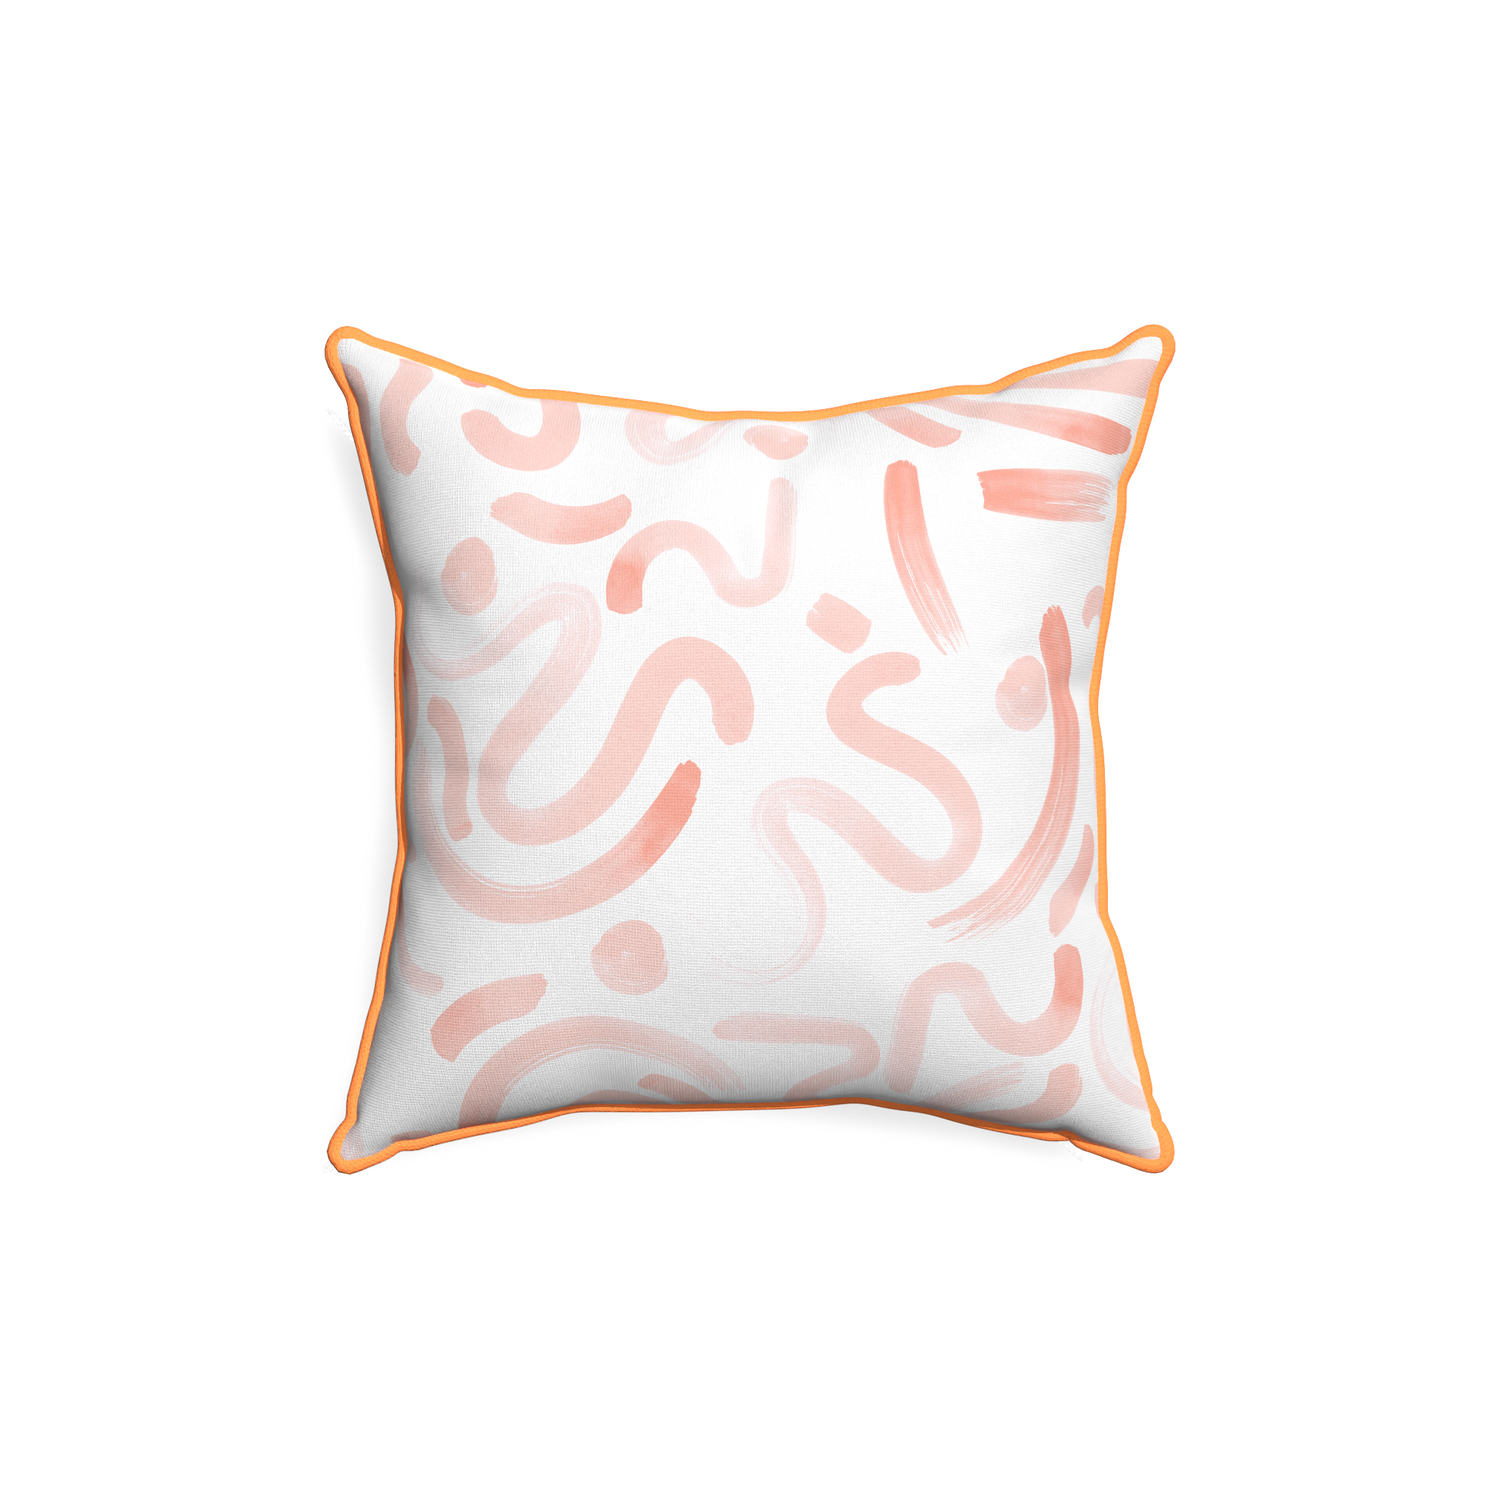 18-square hockney pink custom pillow with clementine piping on white background